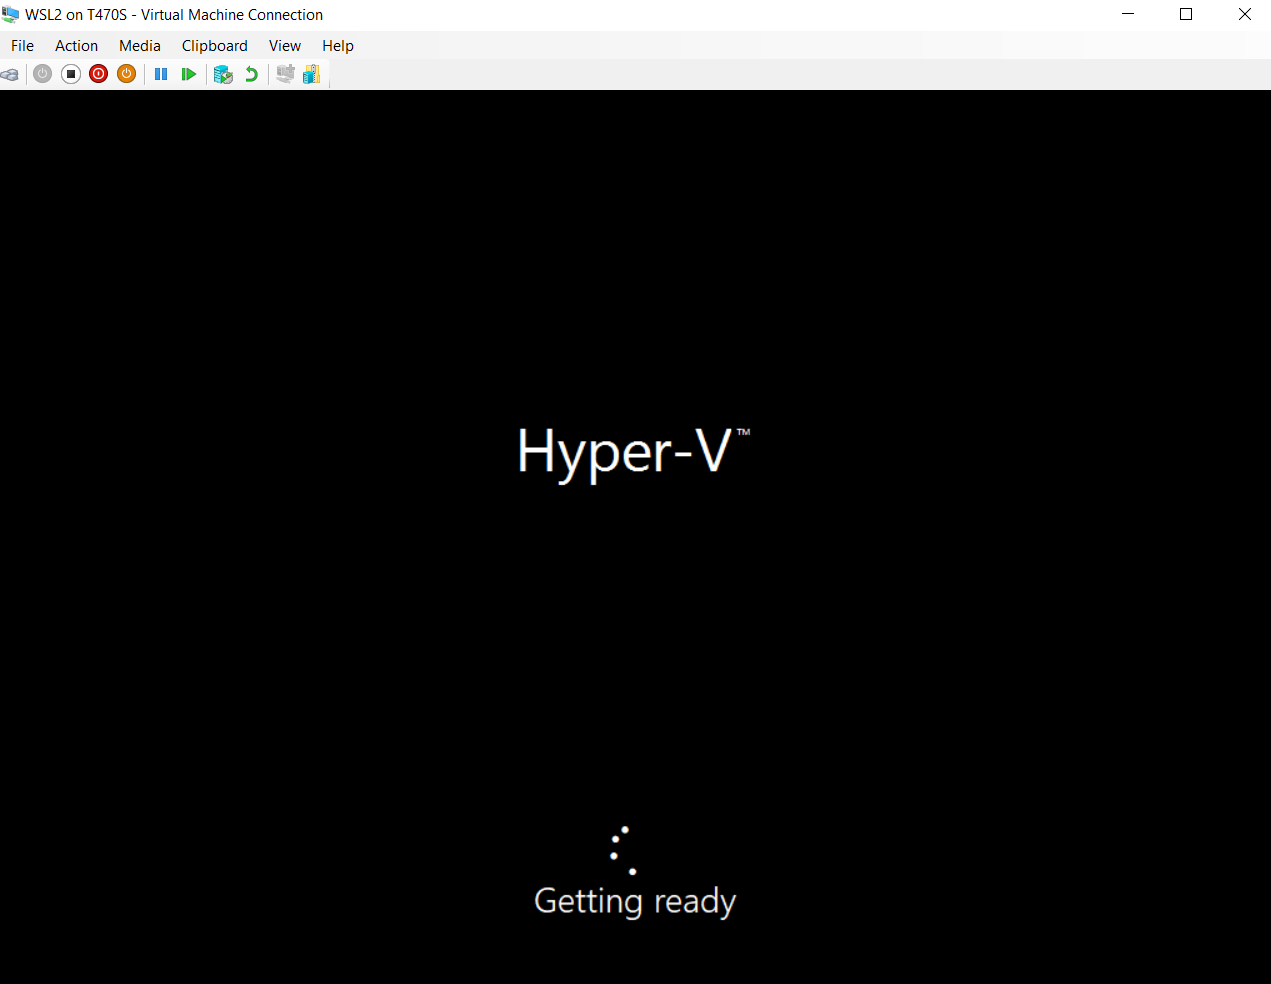 Visual Guide to Trying WSL2 on Hyper-V